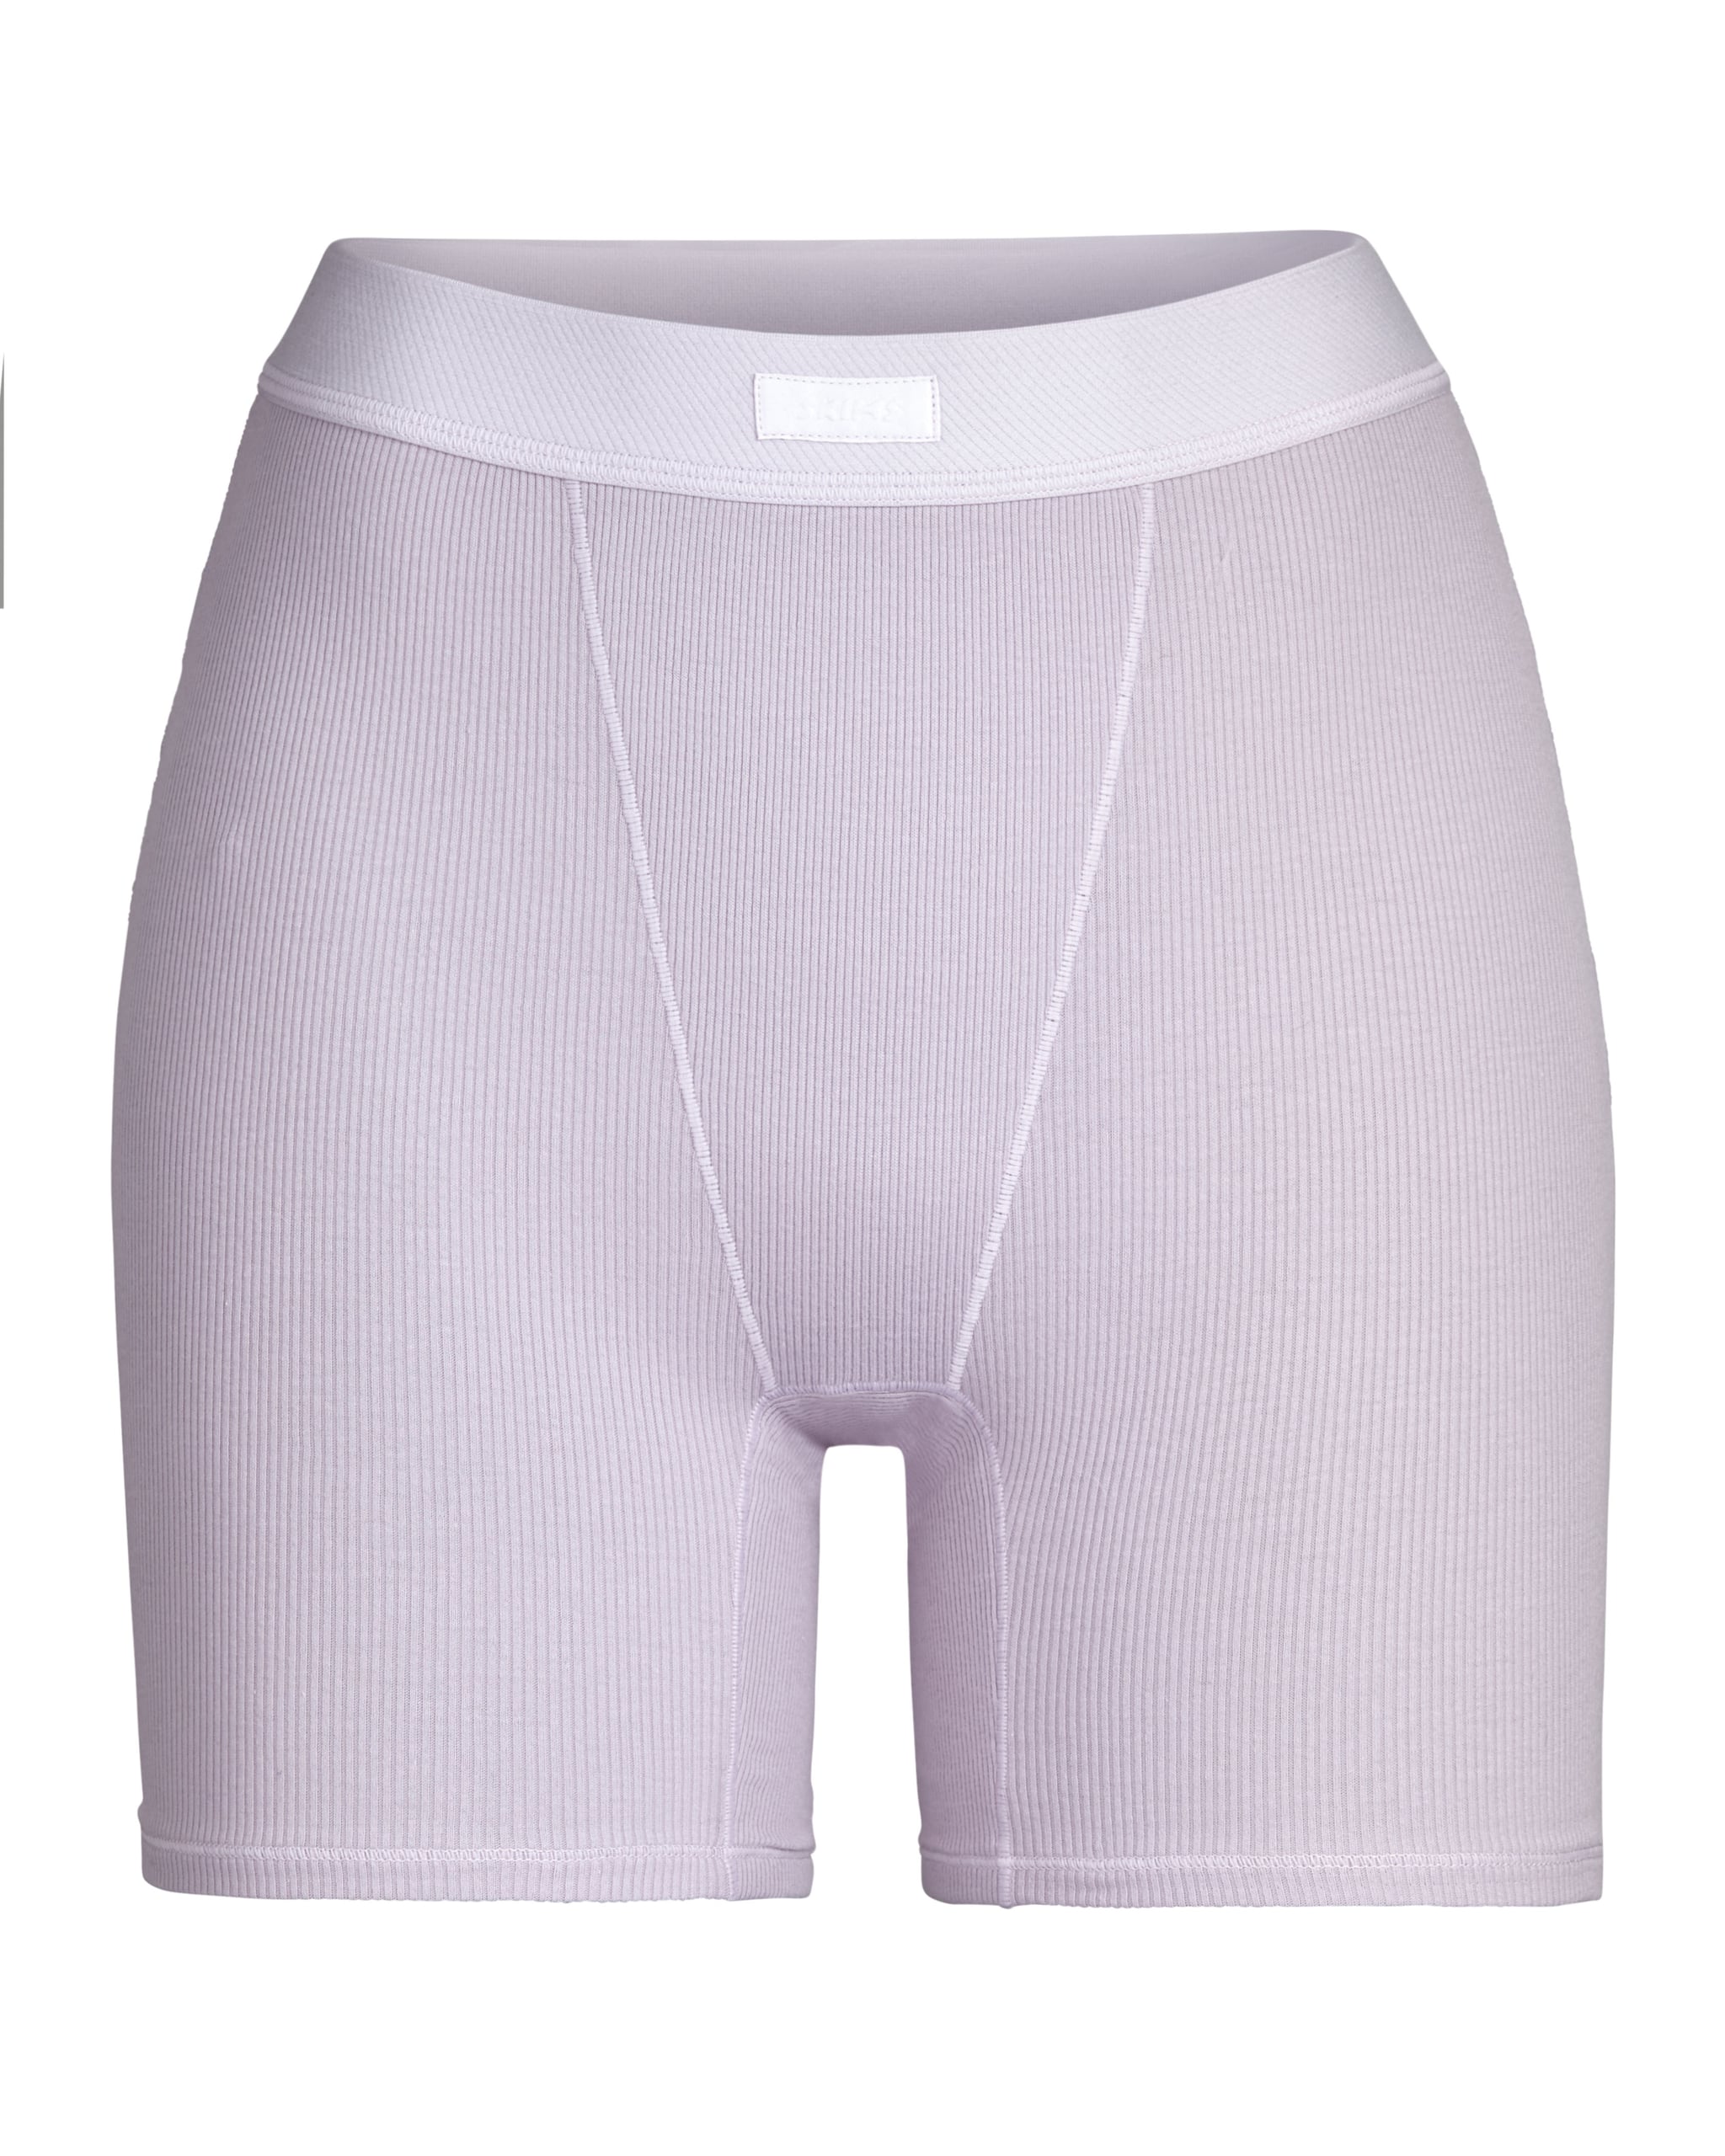 Skims Cotton Ribbed Boxer in Iris Mica, Kim Kardashian Launches Cotton  Skims Collection, and TBH, It Looks a Lot Like Her Everyday Clothes